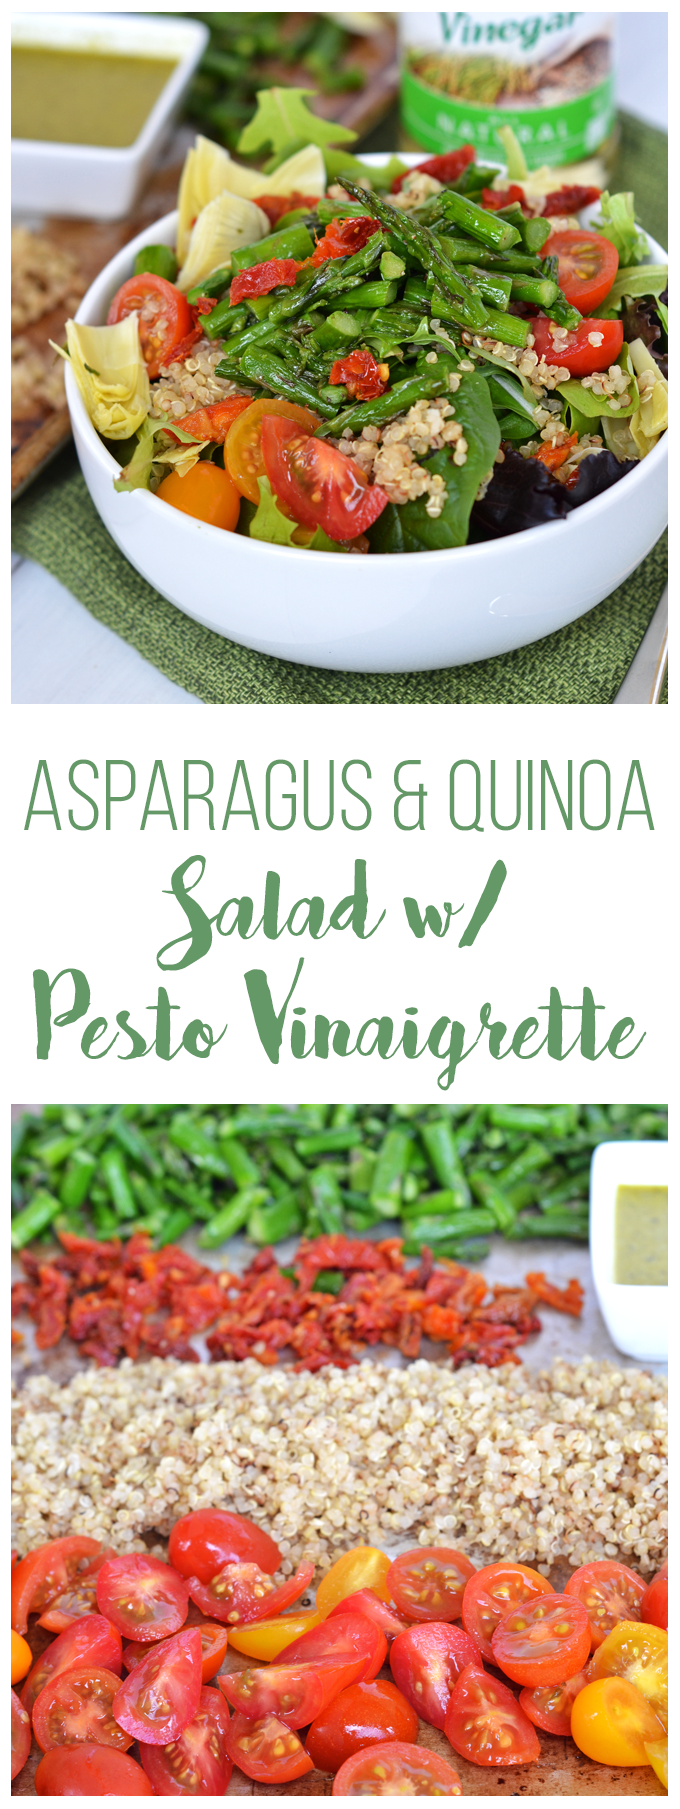 This Asparagus & Quinoa Salad with Pesto Vinaigrette is a simple and perfect salad full of flavor and nutrients! Using Rice Vinegar gives the dressing a perfectly subtle punch!